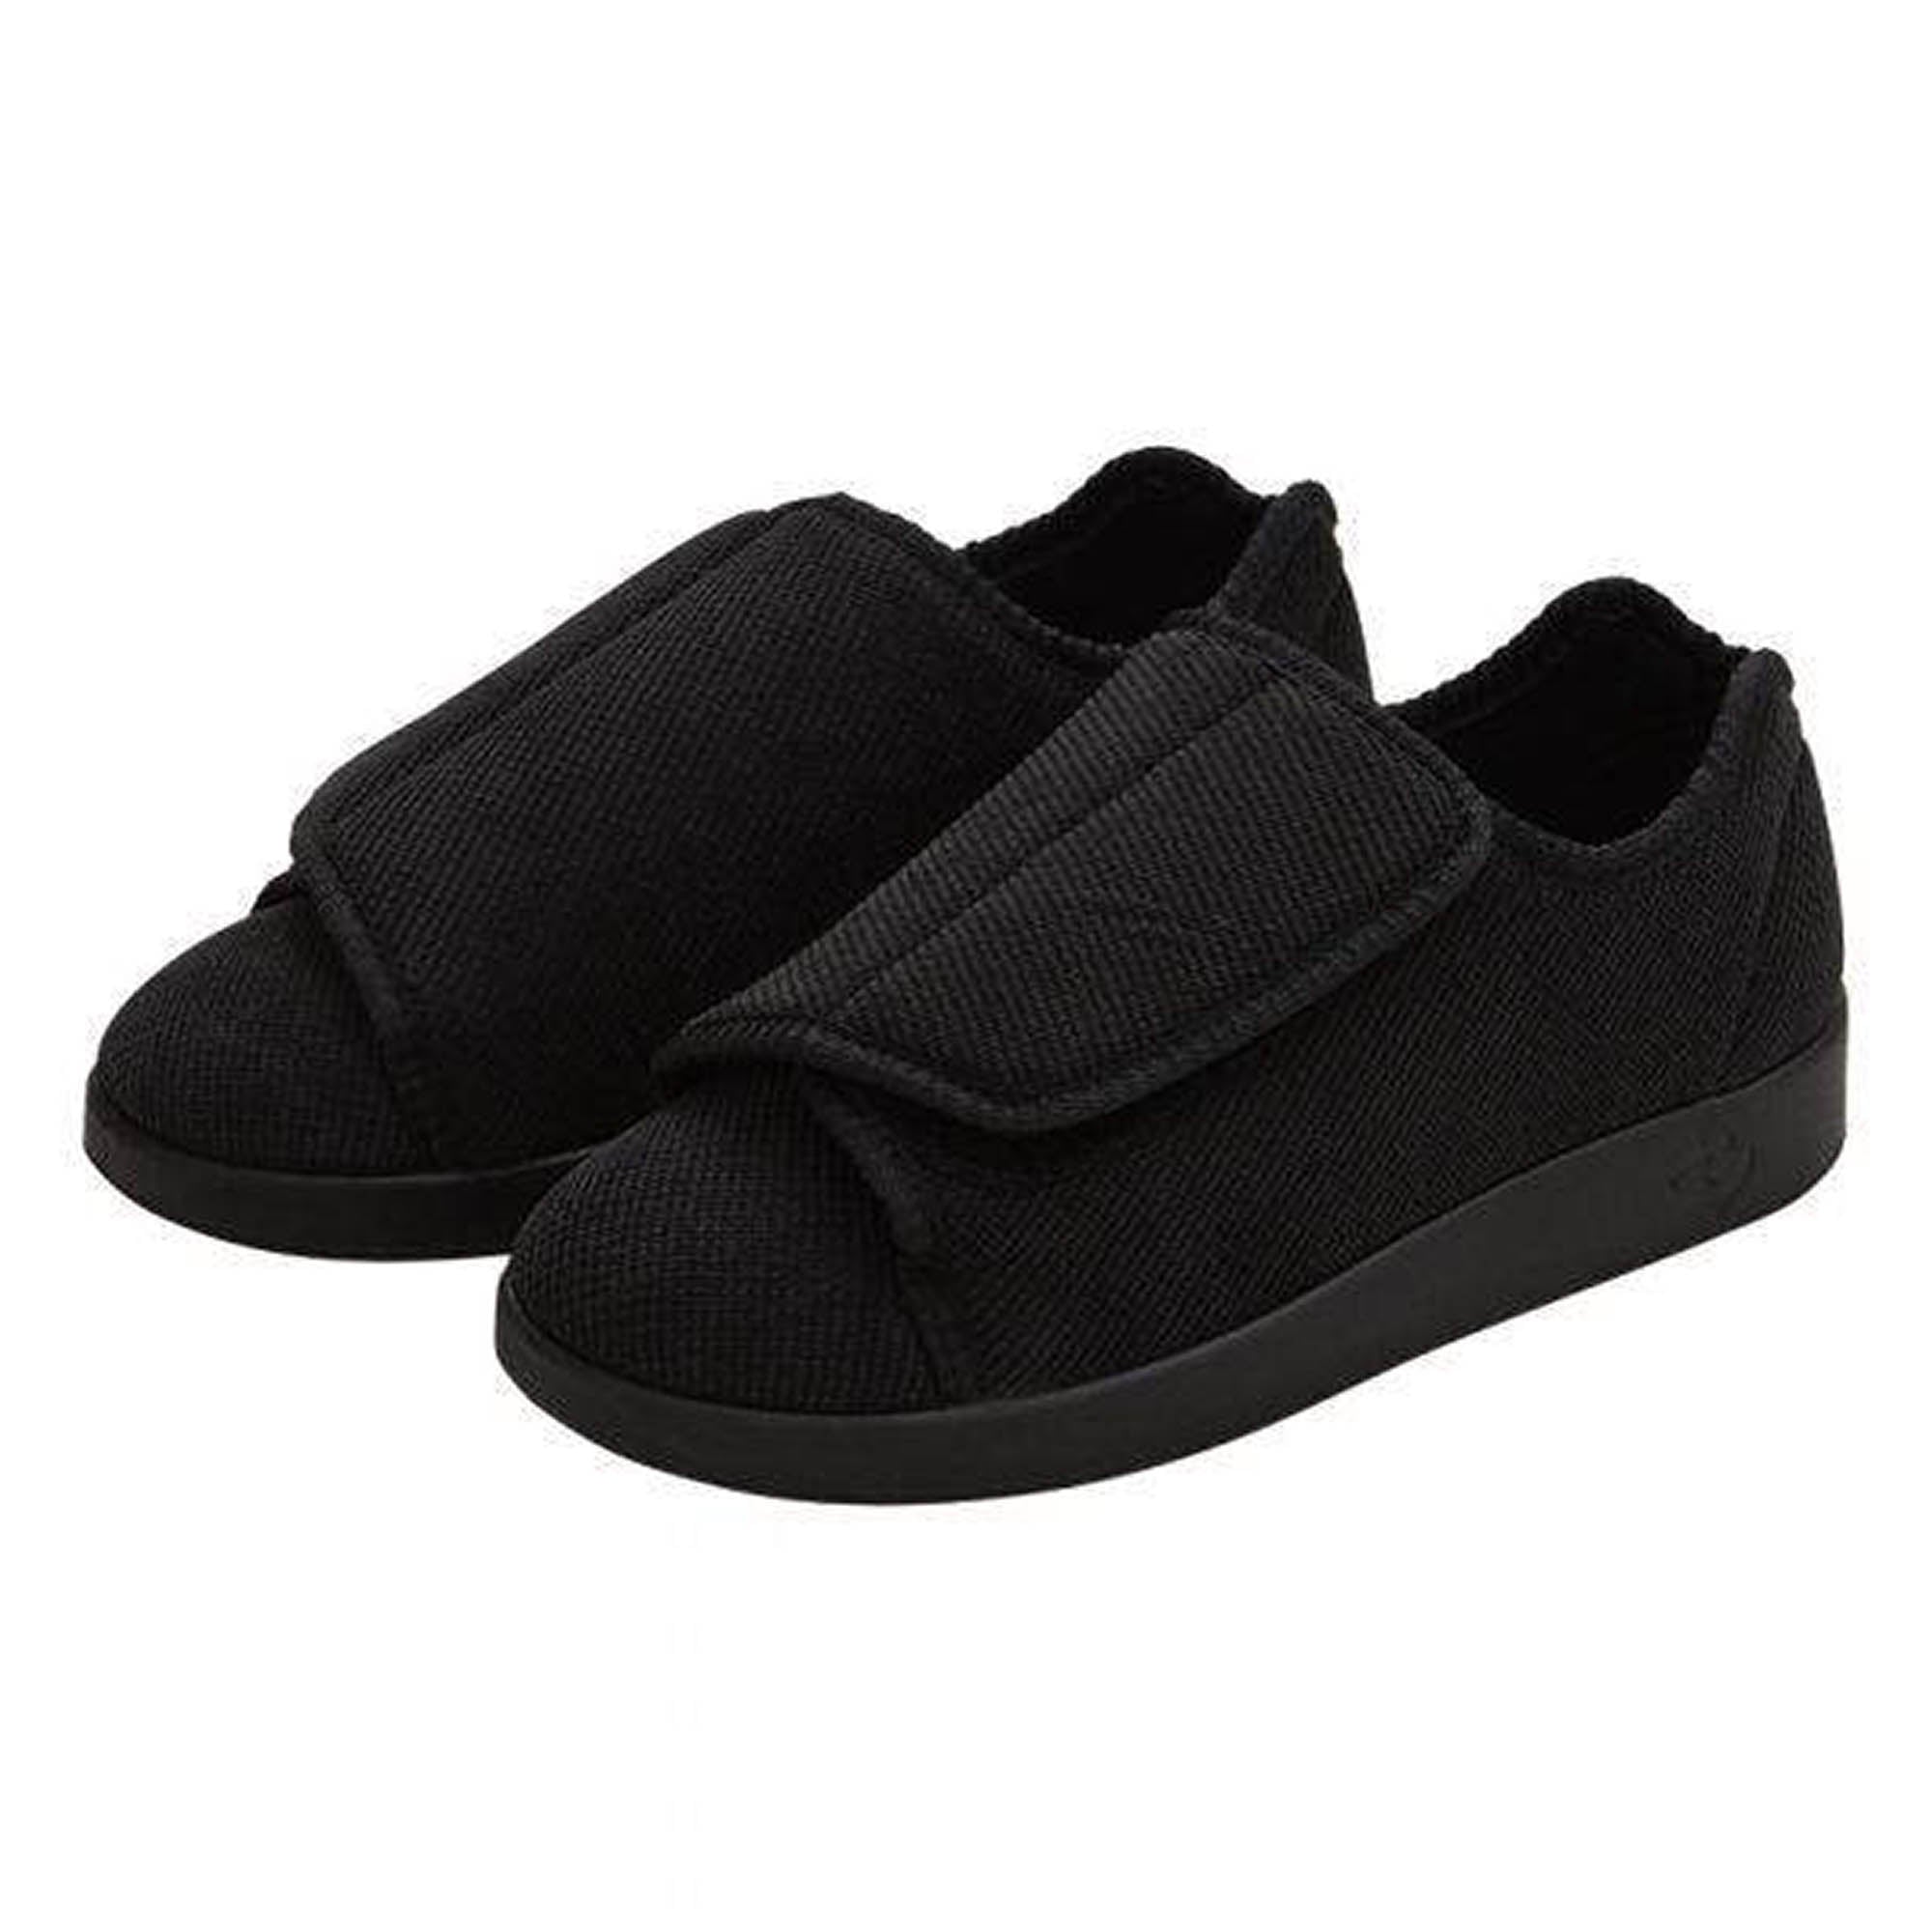 Silverts Women's Antimicrobial Extra Extra Wide Easy-Closure Slippers - Black - 8